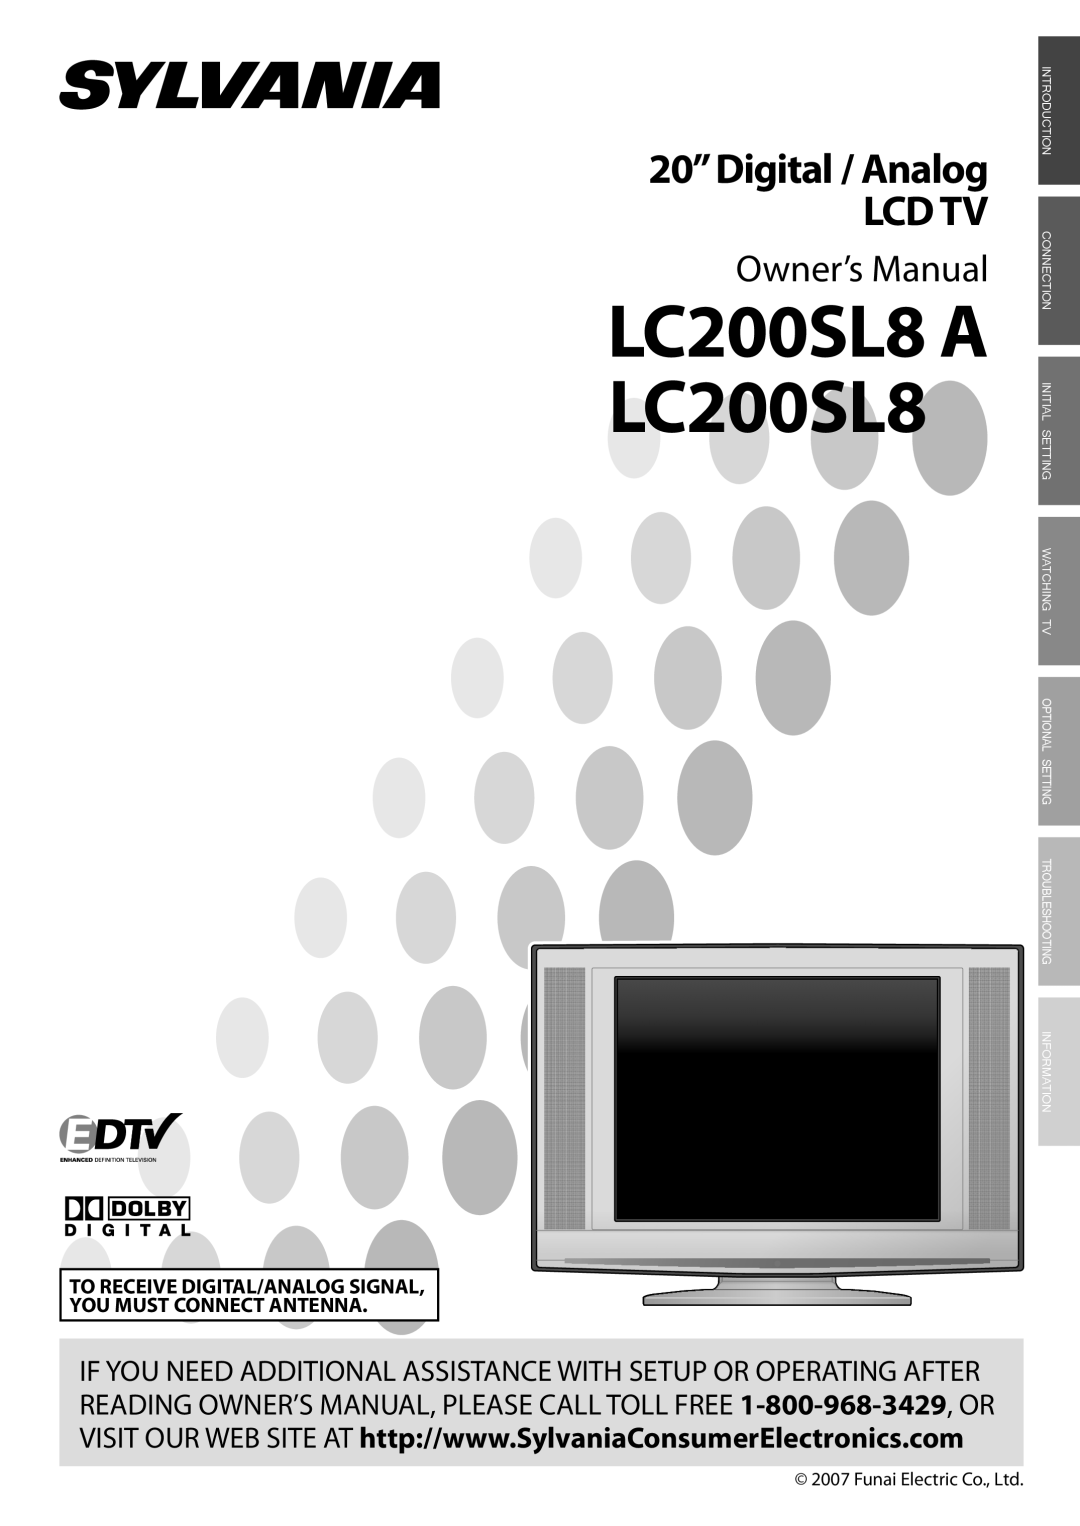 Sylvania LC200SL8A owner manual LC200SL8 A LC200SL8, 20”Digital / Analog LCD TV, Owner’s Manual 